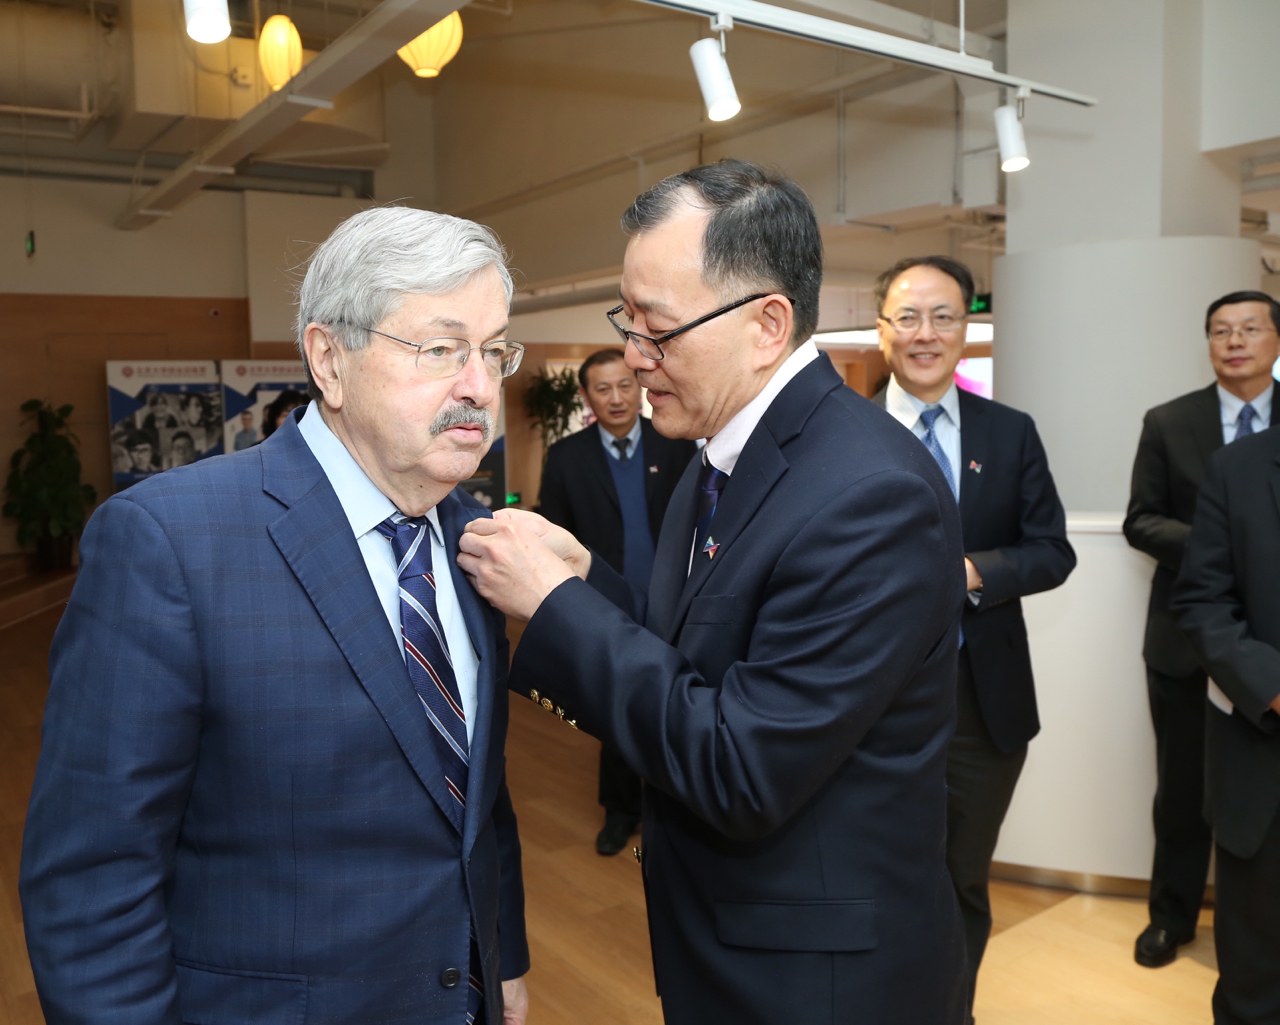 Welcoming US Ambassador to China Mr. Branstad at the launching ceremony of China-US Joint Innovation Centre for Youth Exchange at Peking University